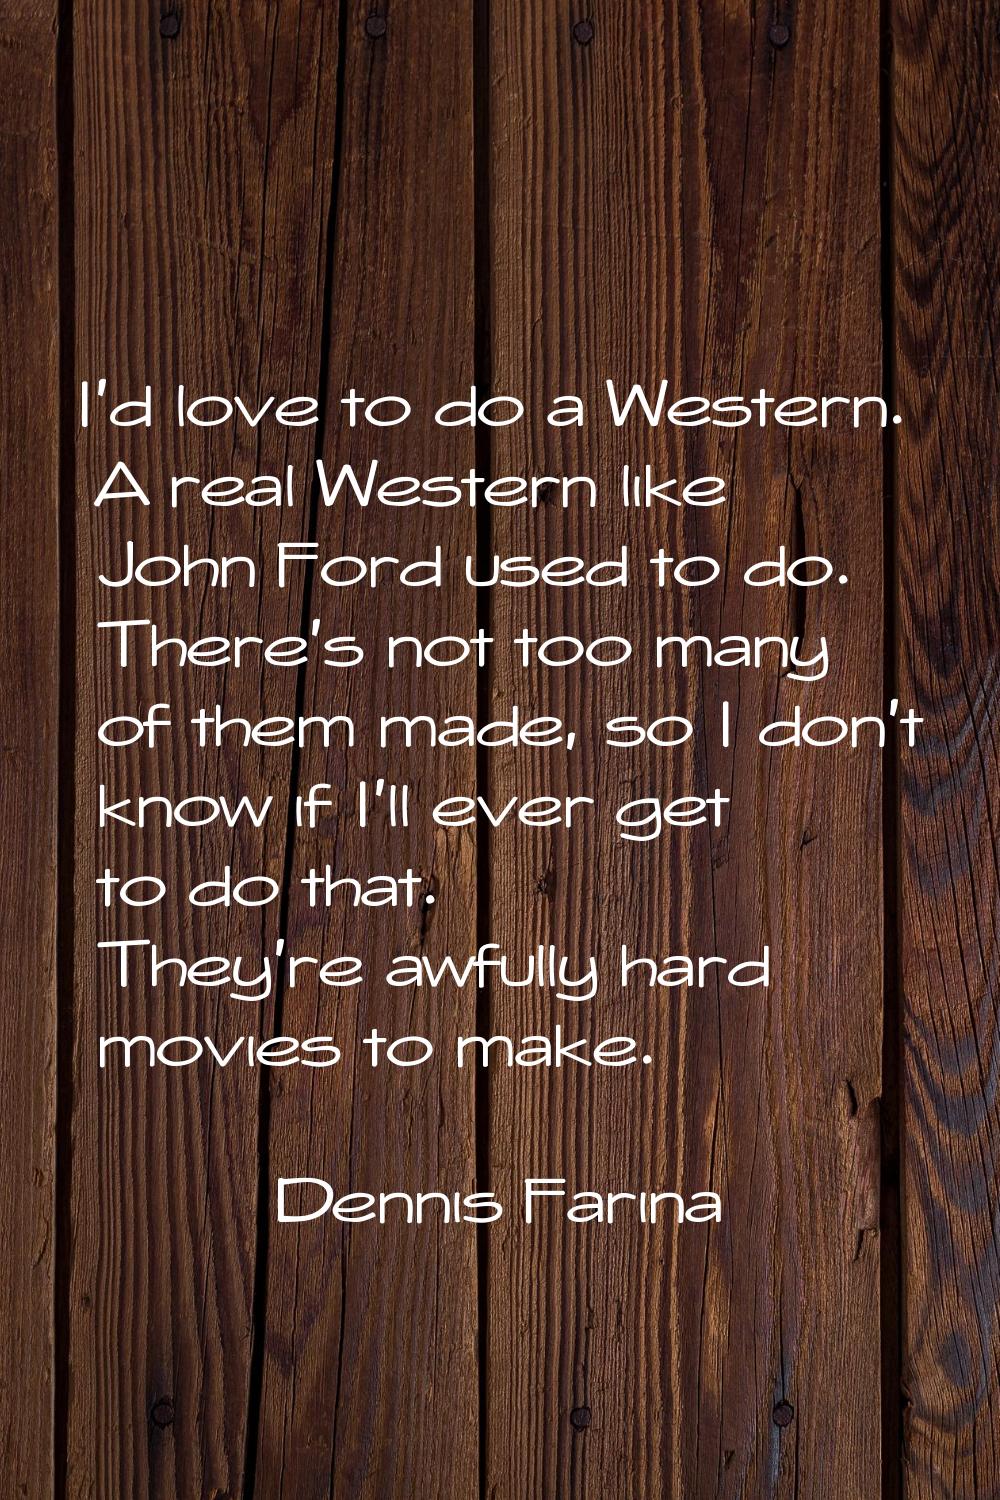 I'd love to do a Western. A real Western like John Ford used to do. There's not too many of them ma